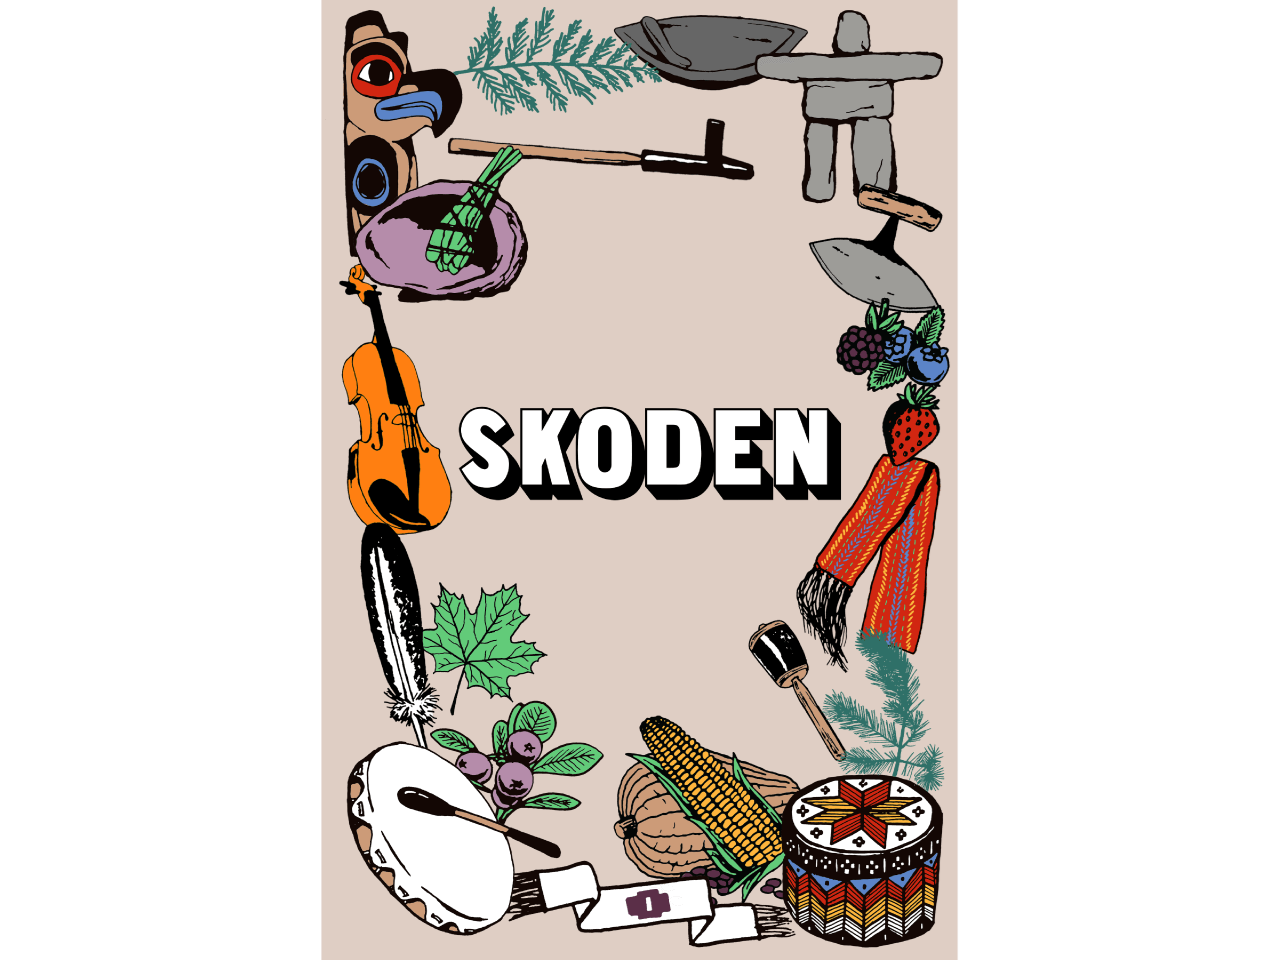 Skoden: Moving Forward in a Good Way